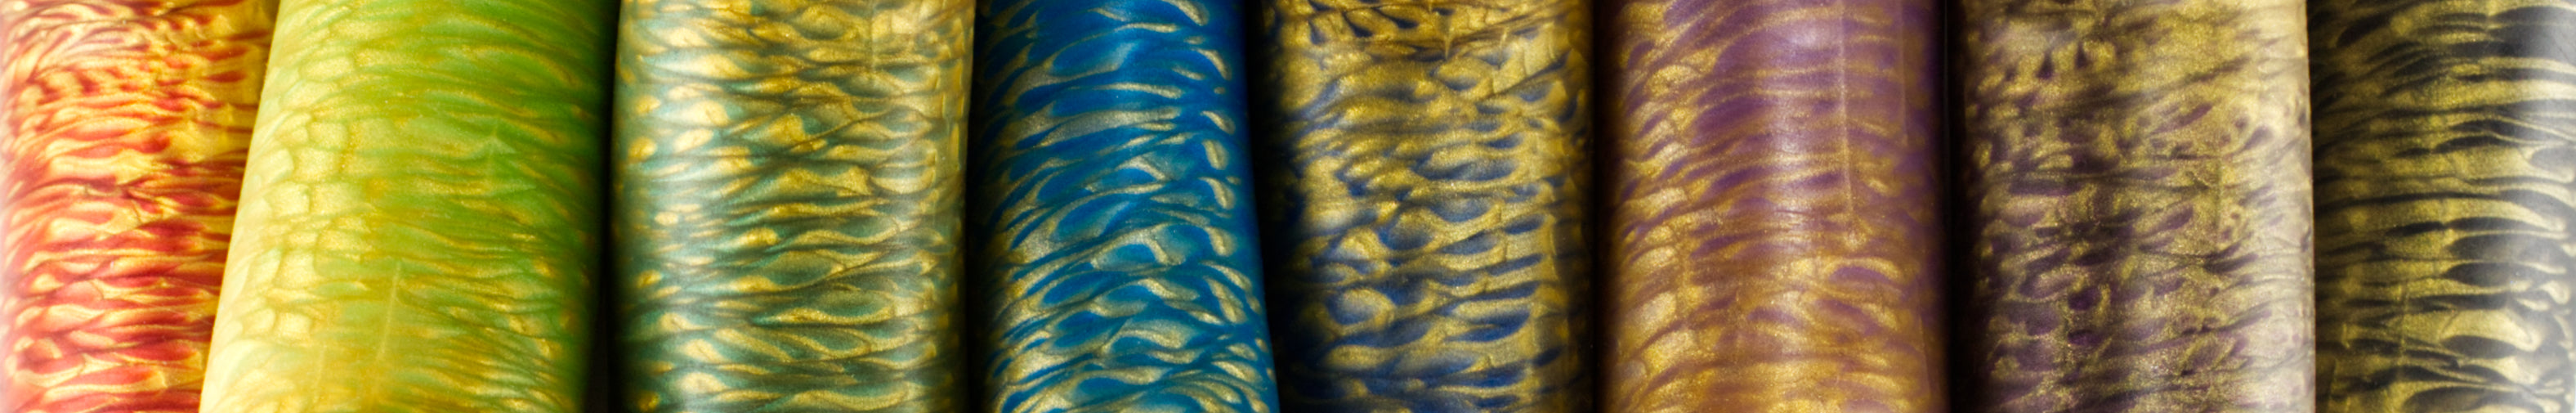 Top view of a row of Sidekick dildos poured in various colors marbled with gold.